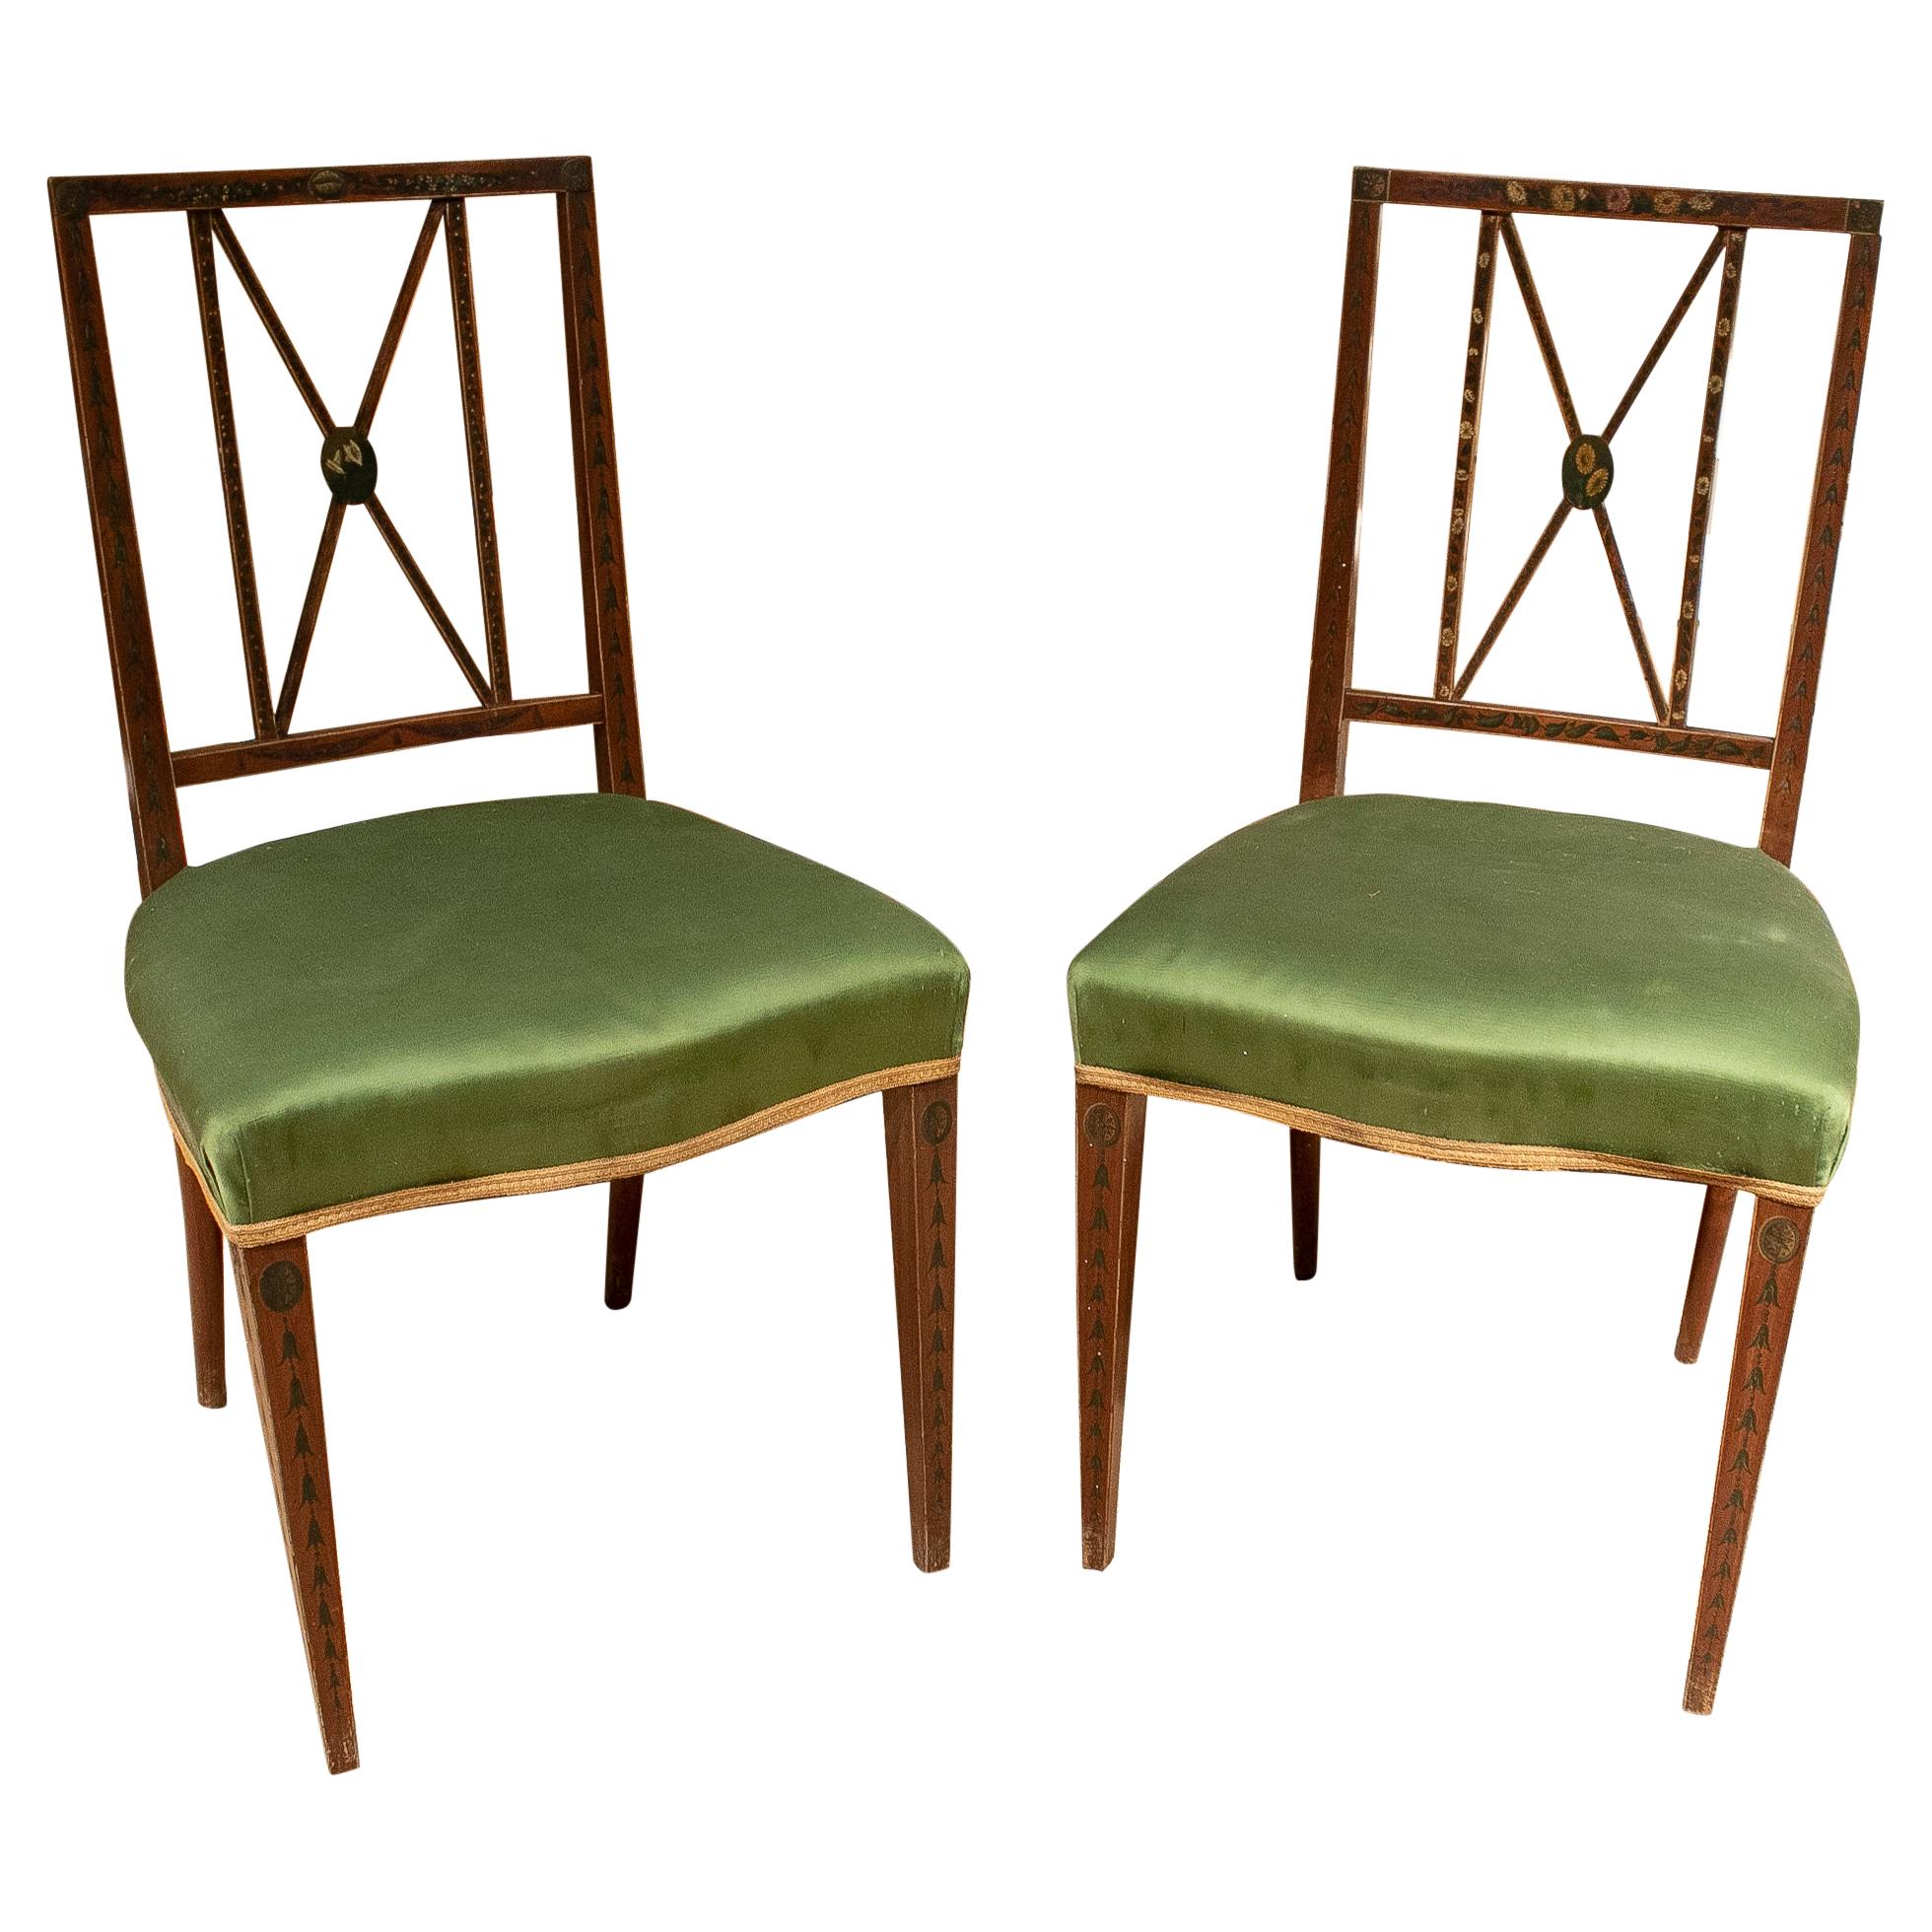 Pair of 19th Century Hand Painted English Silk Upholstered Chairs For Sale